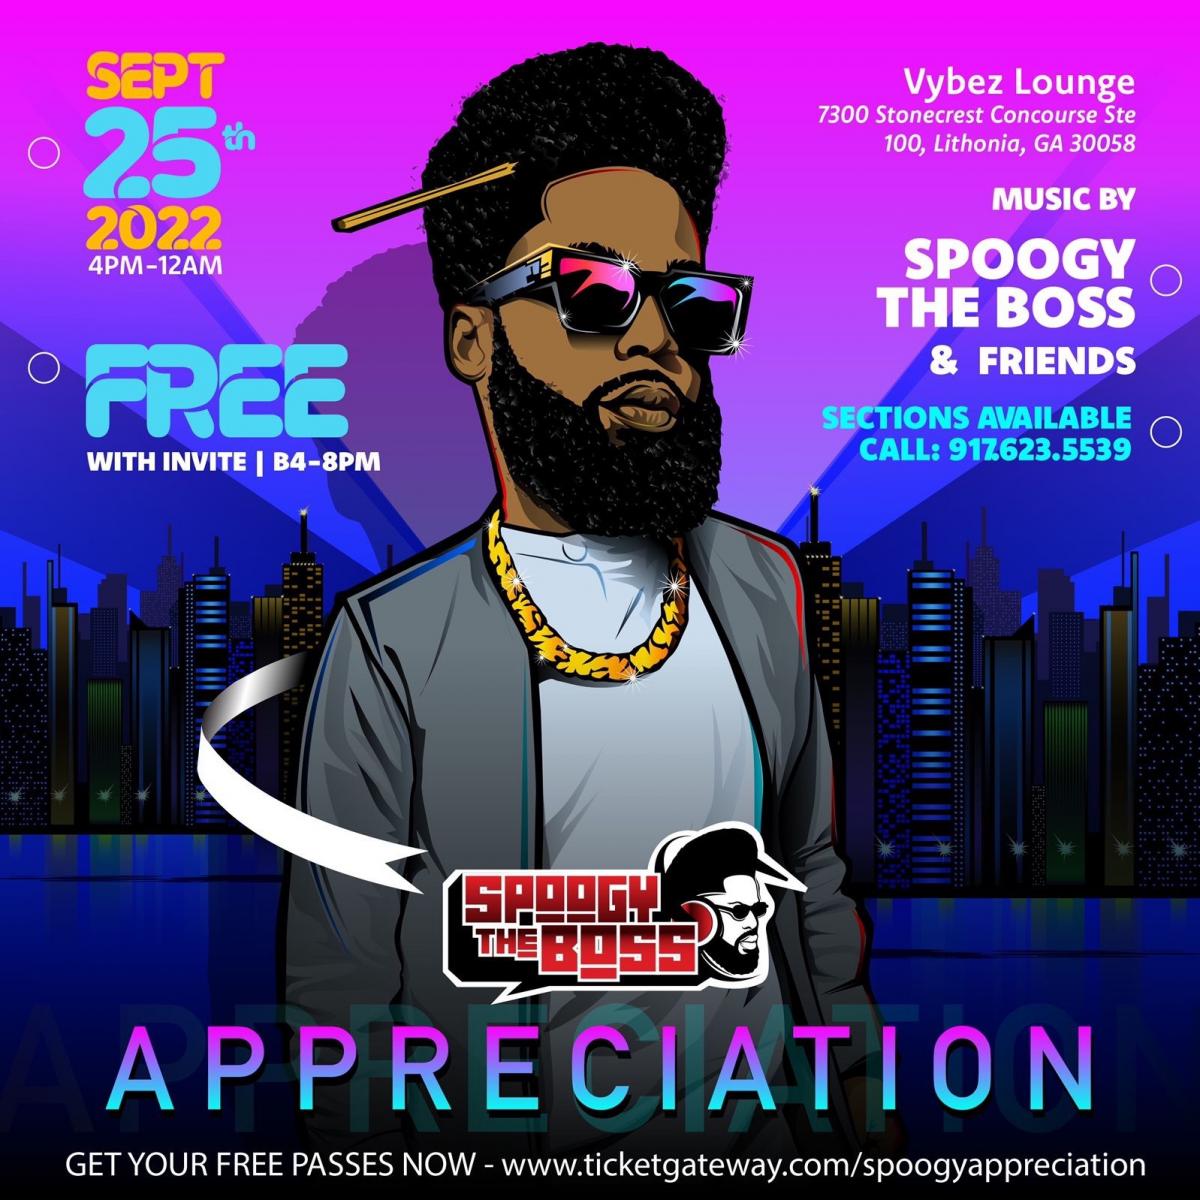 Spoogy The Boss Appreciation flyer or graphic.